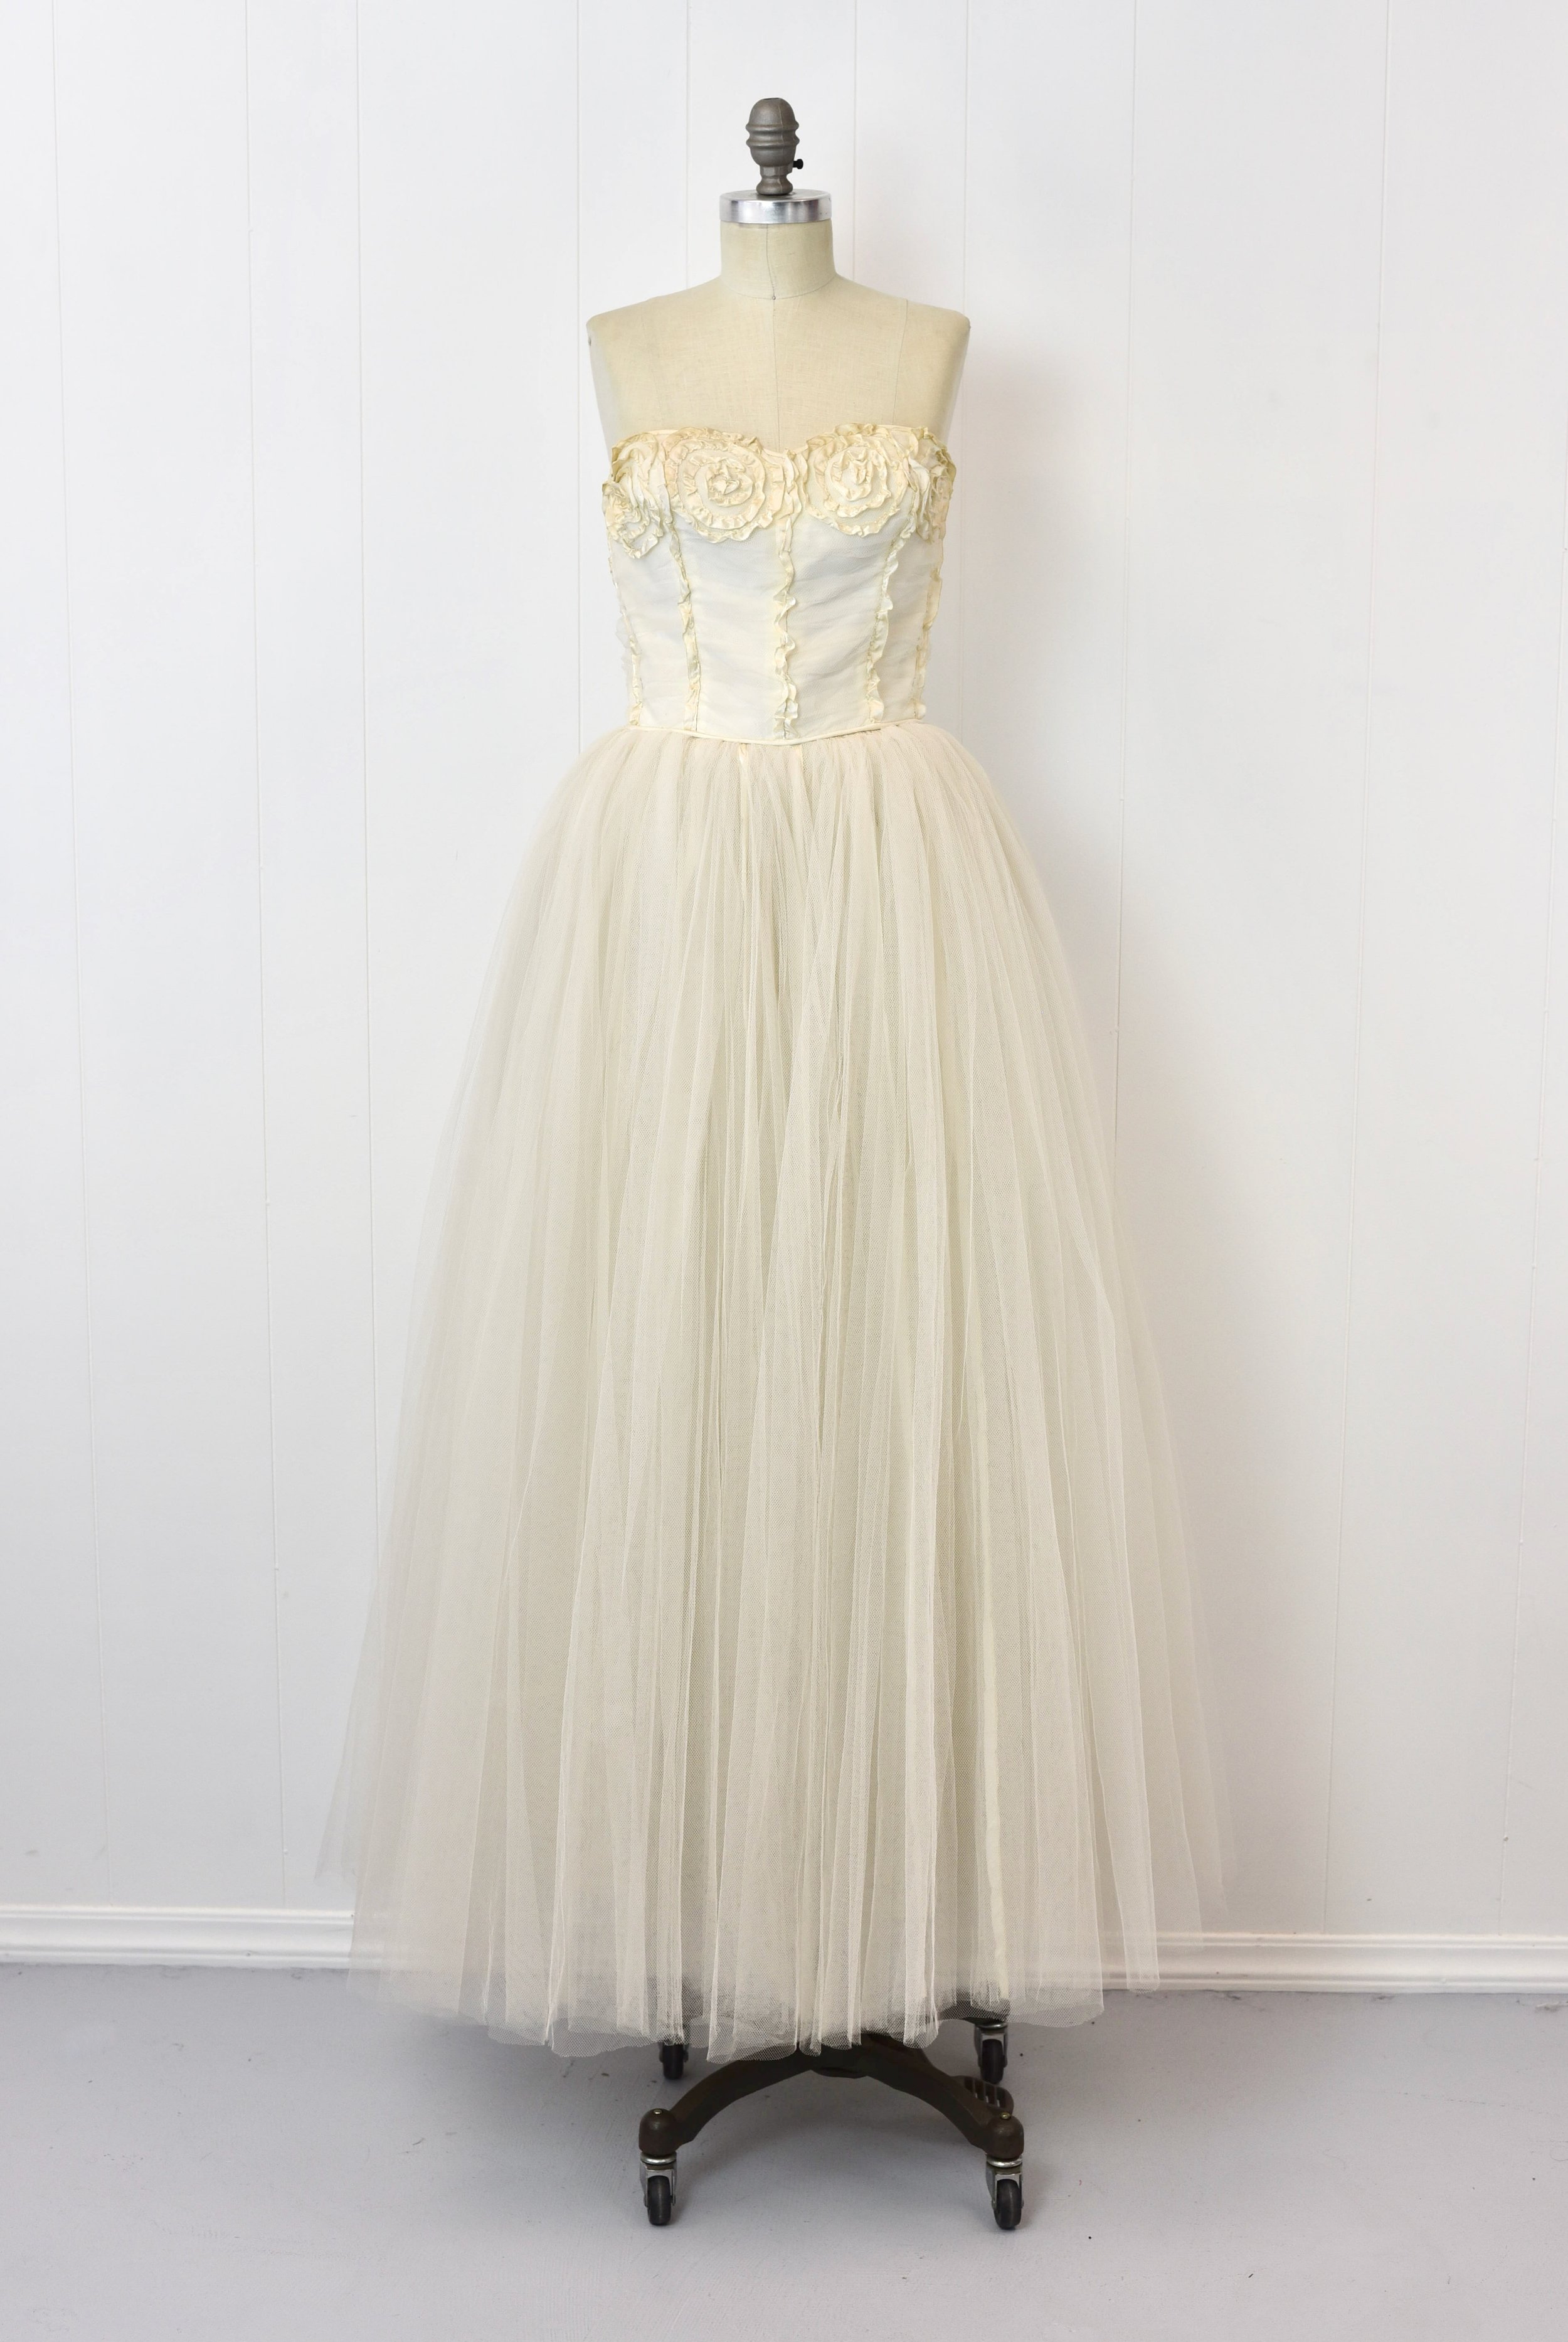 1950s White Tulle Ribbon Bridal Wedding Party Prom Pinup Cupcake Dress Gown  — Canned Ham Vintage